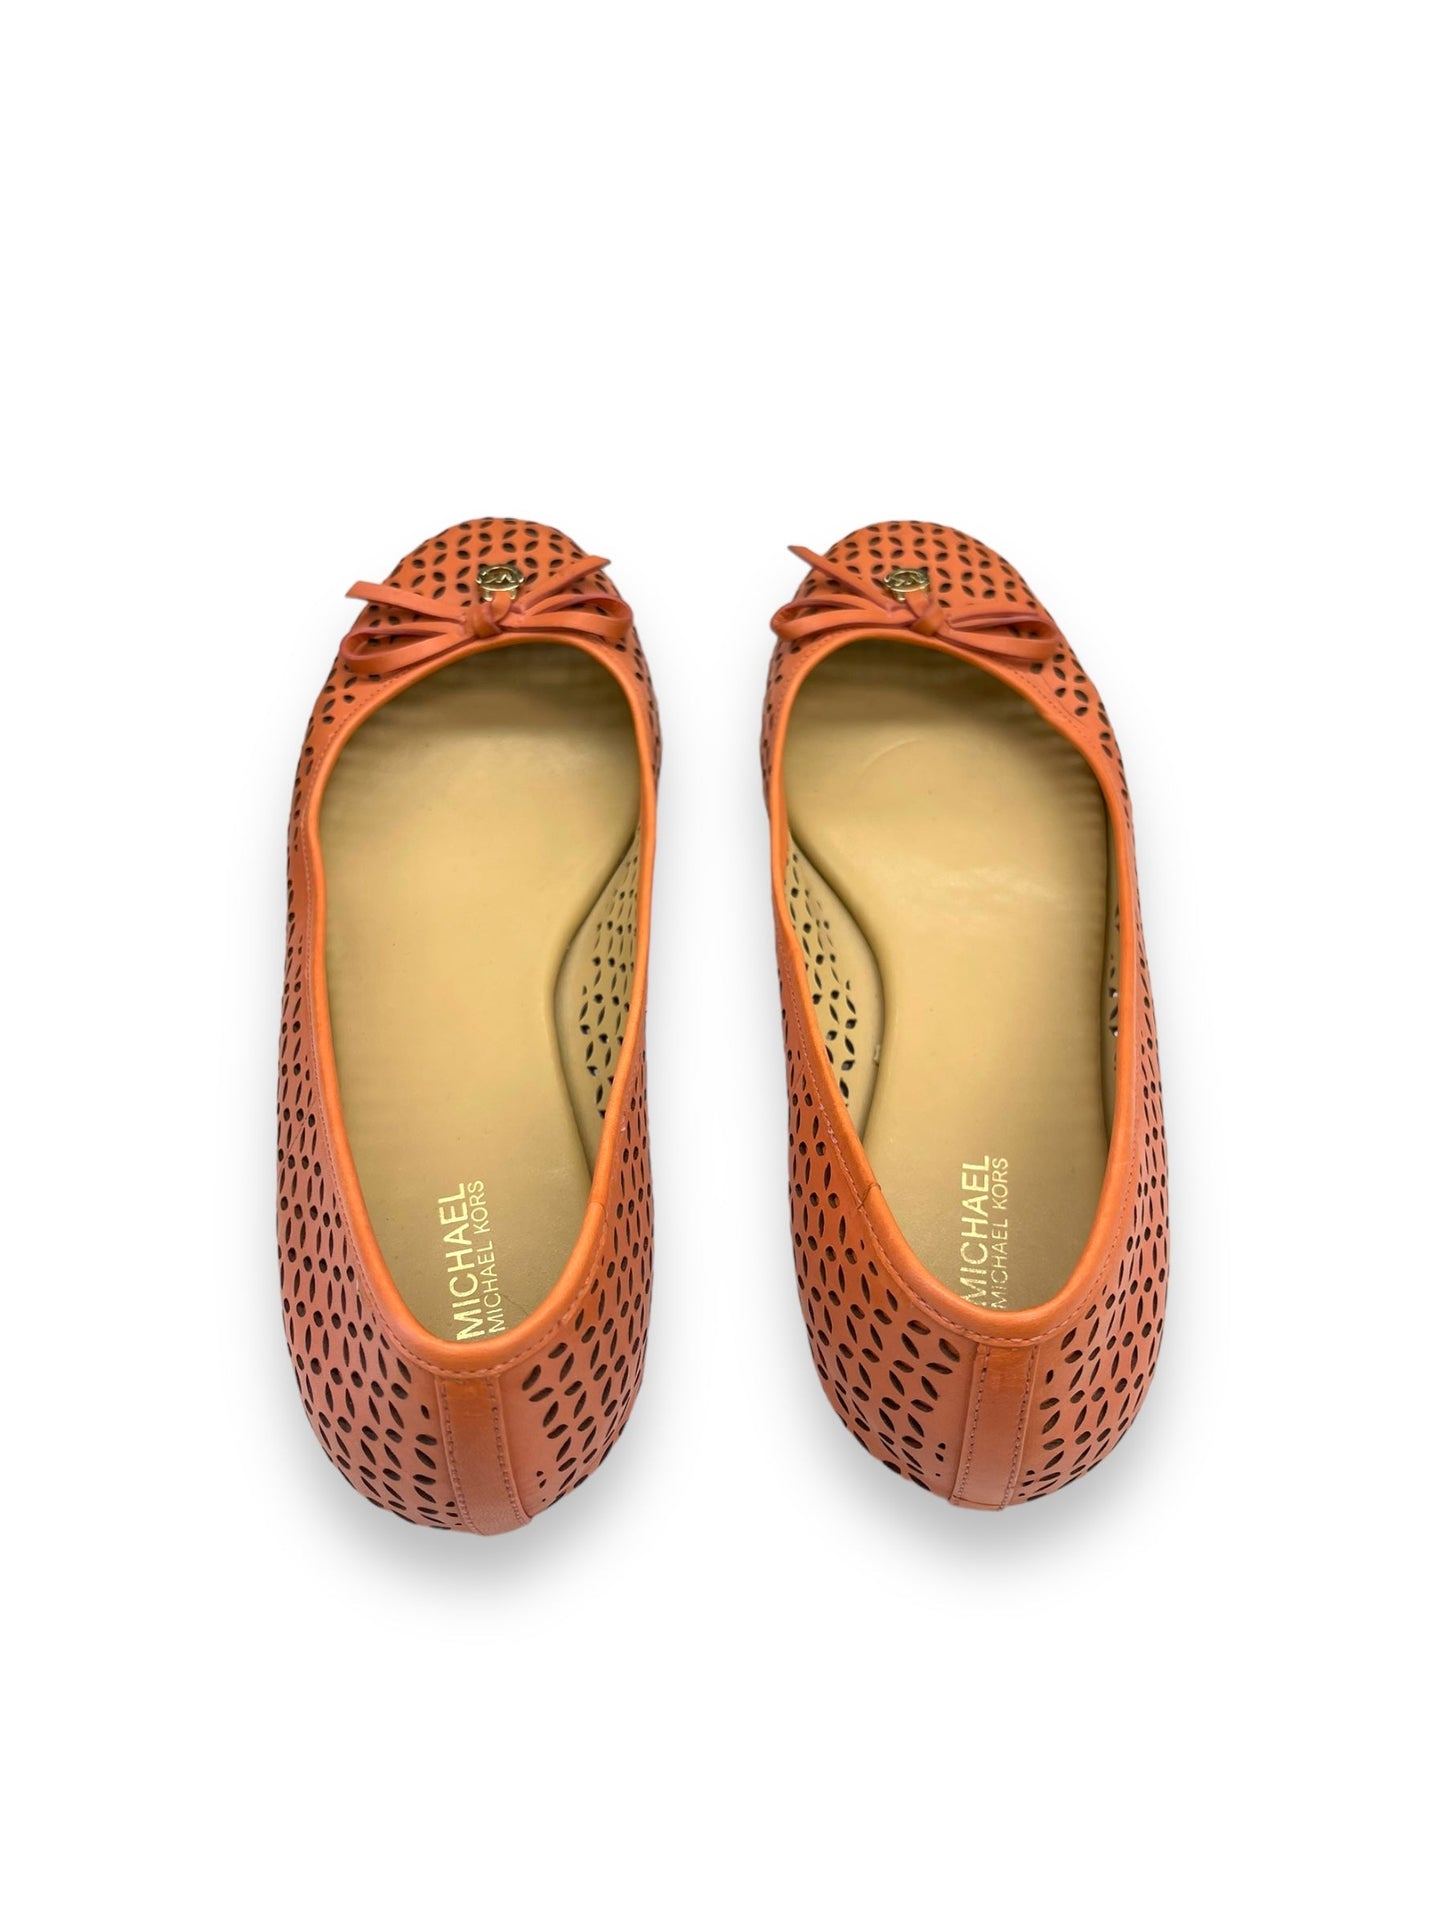 Shoes Flats By Michael Kors  Size: 9